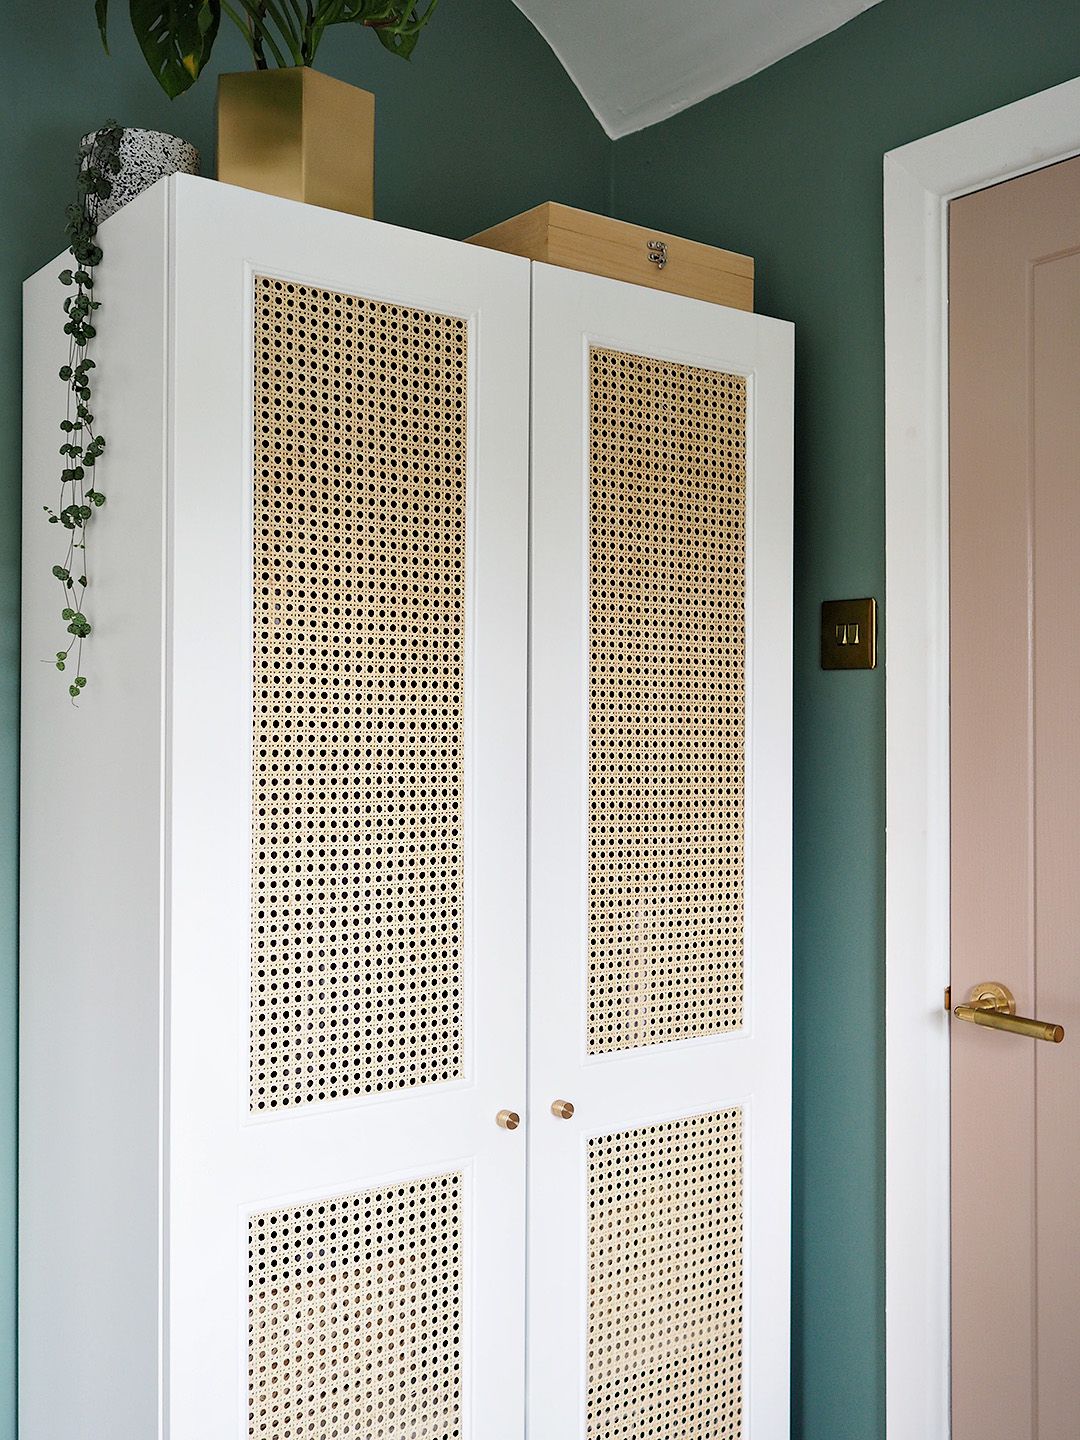 Rattan Cane Ikea Wardrobe Diy Hack For Under £170 | Lust Living Intended For White Rattan Wardrobes (View 14 of 15)